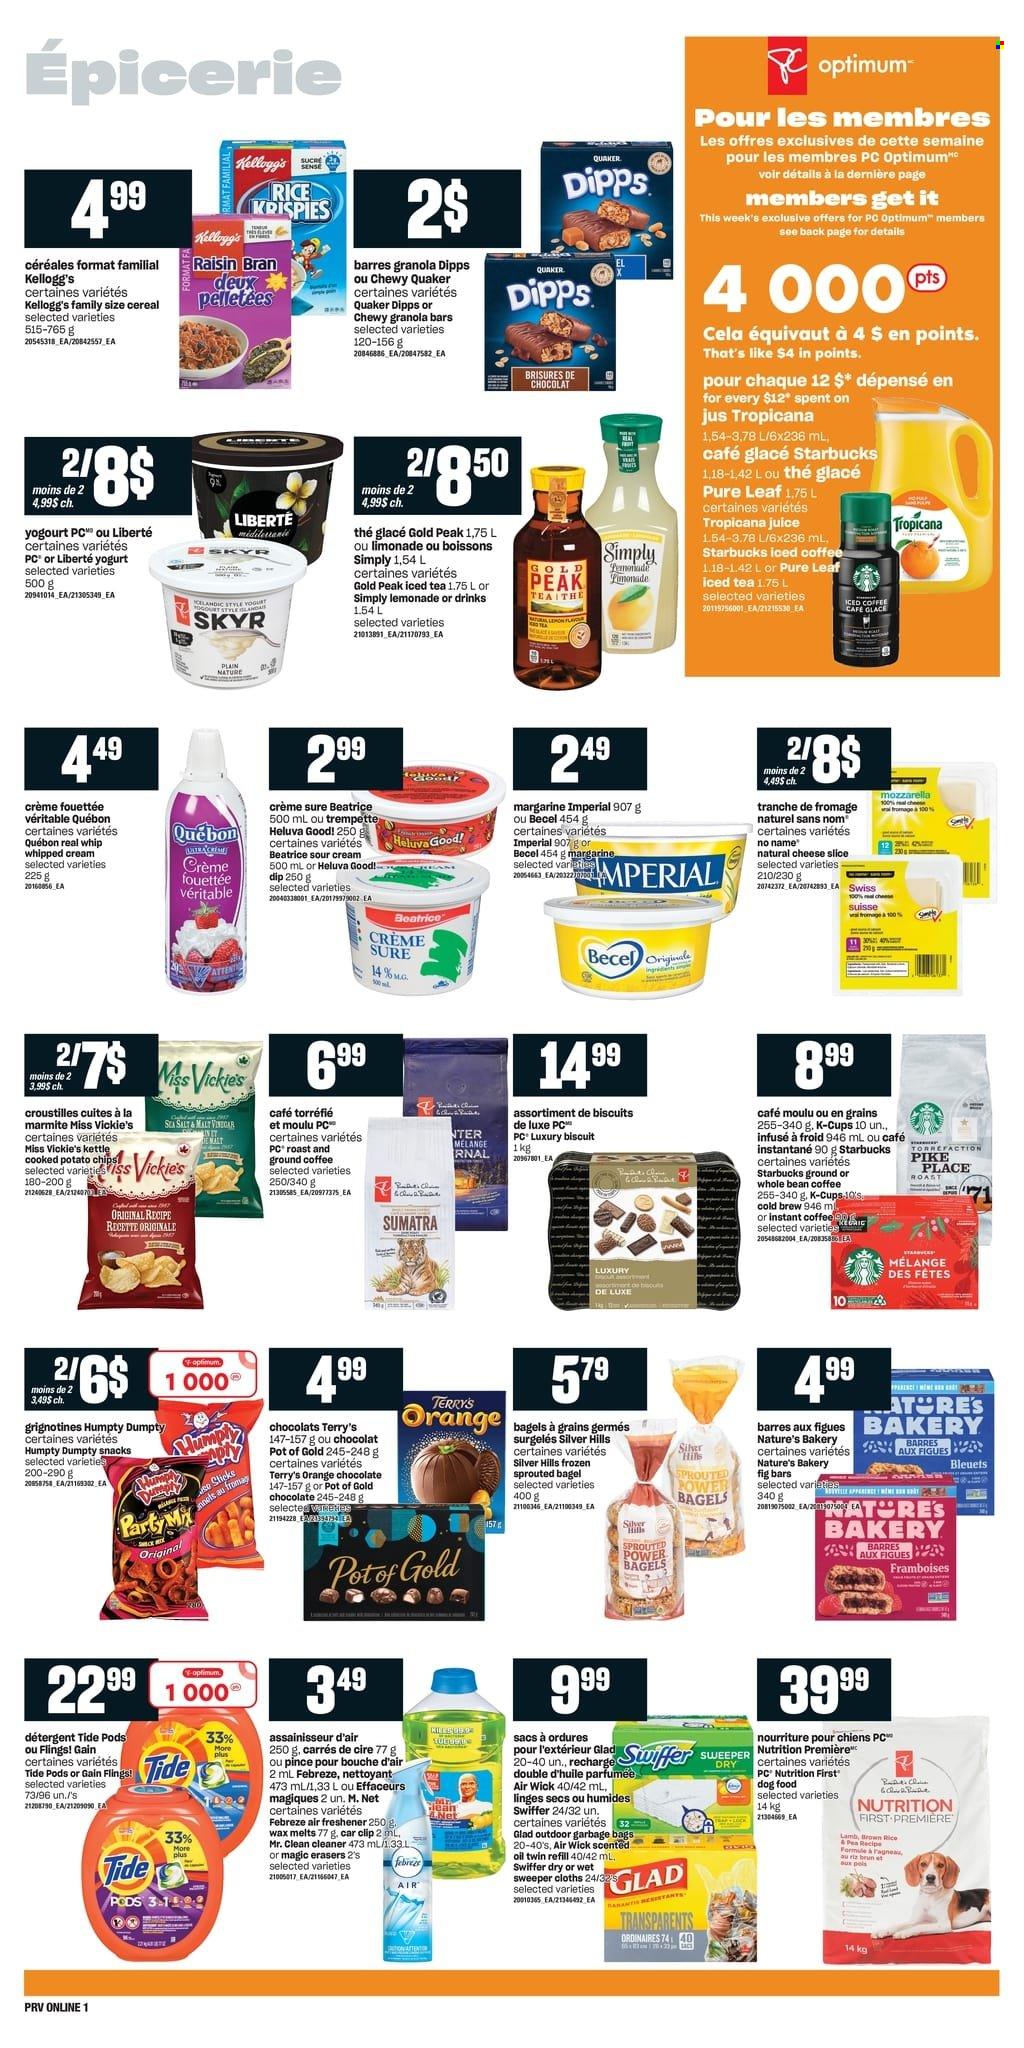 thumbnail - Provigo Flyer - November 25, 2021 - December 01, 2021 - Sales products - bagels, No Name, Quaker, cheese, yoghurt, margarine, sour cream, whipped cream, chocolate, snack, Kellogg's, biscuit, potato chips, cereals, granola bar, Rice Krispies, Raisin Bran, brown rice, oil, lemonade, juice, ice tea, iced coffee, Pure Leaf, instant coffee, ground coffee, coffee capsules, Starbucks, K-Cups, Febreze, Gain, cleaner, Swiffer, Tide, Sure, detergent, mozzarella, oranges. Page 5.